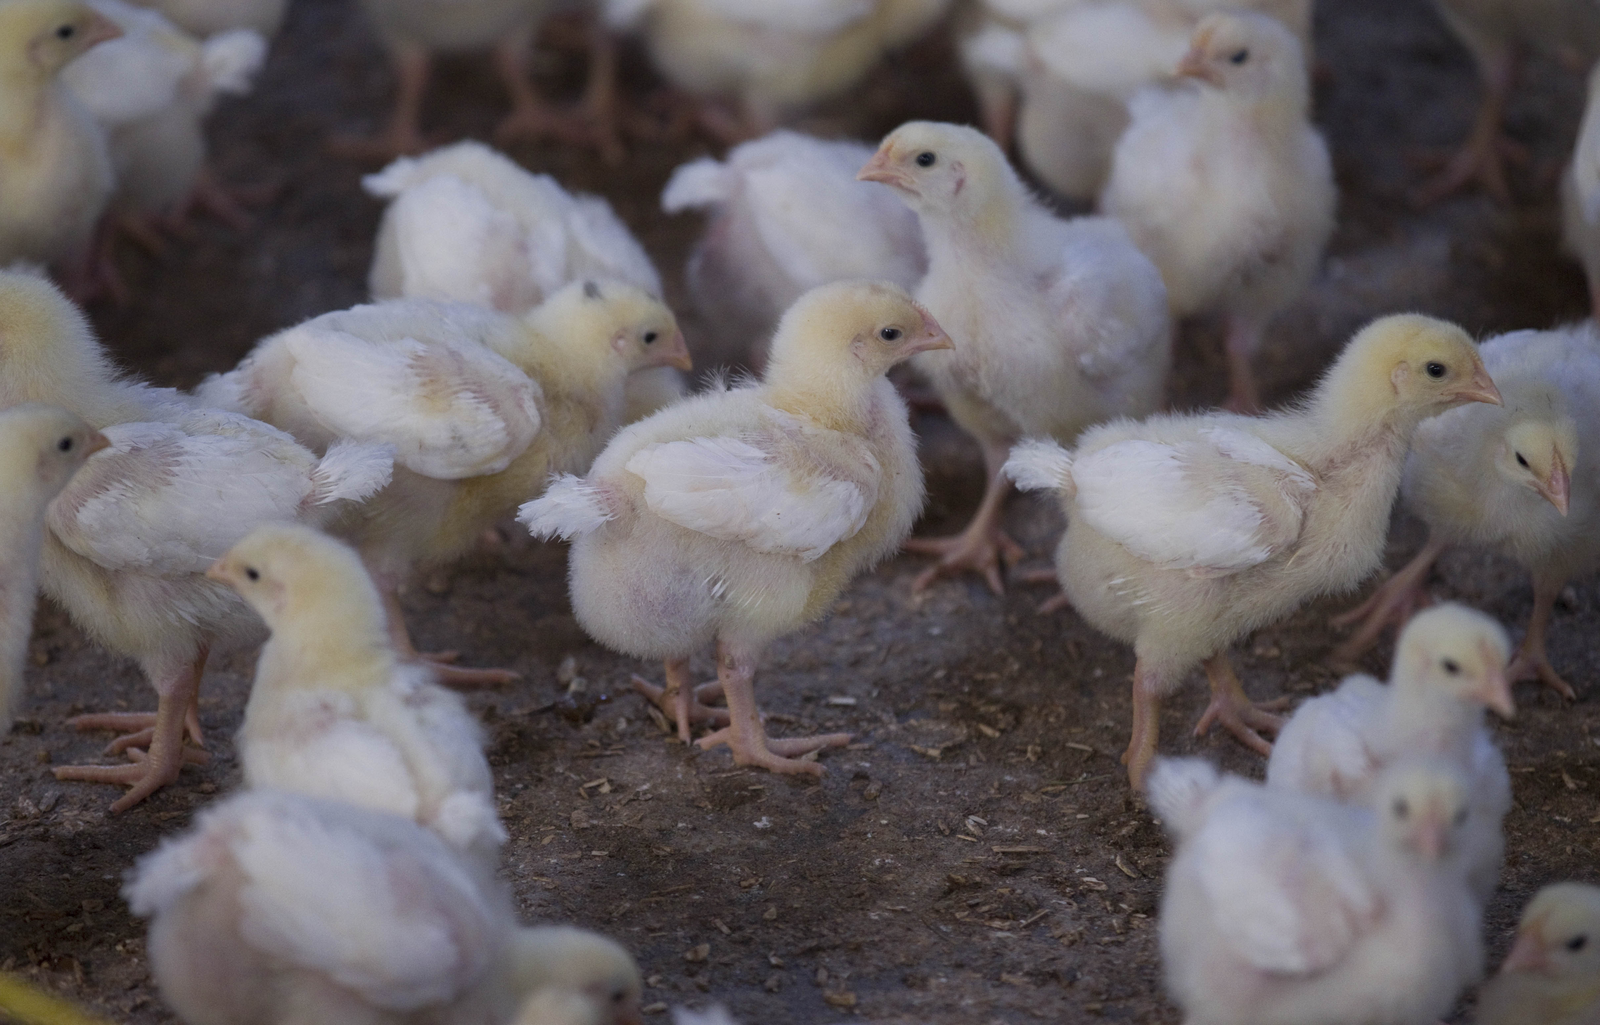 Phytogenics for better gut health in poultry